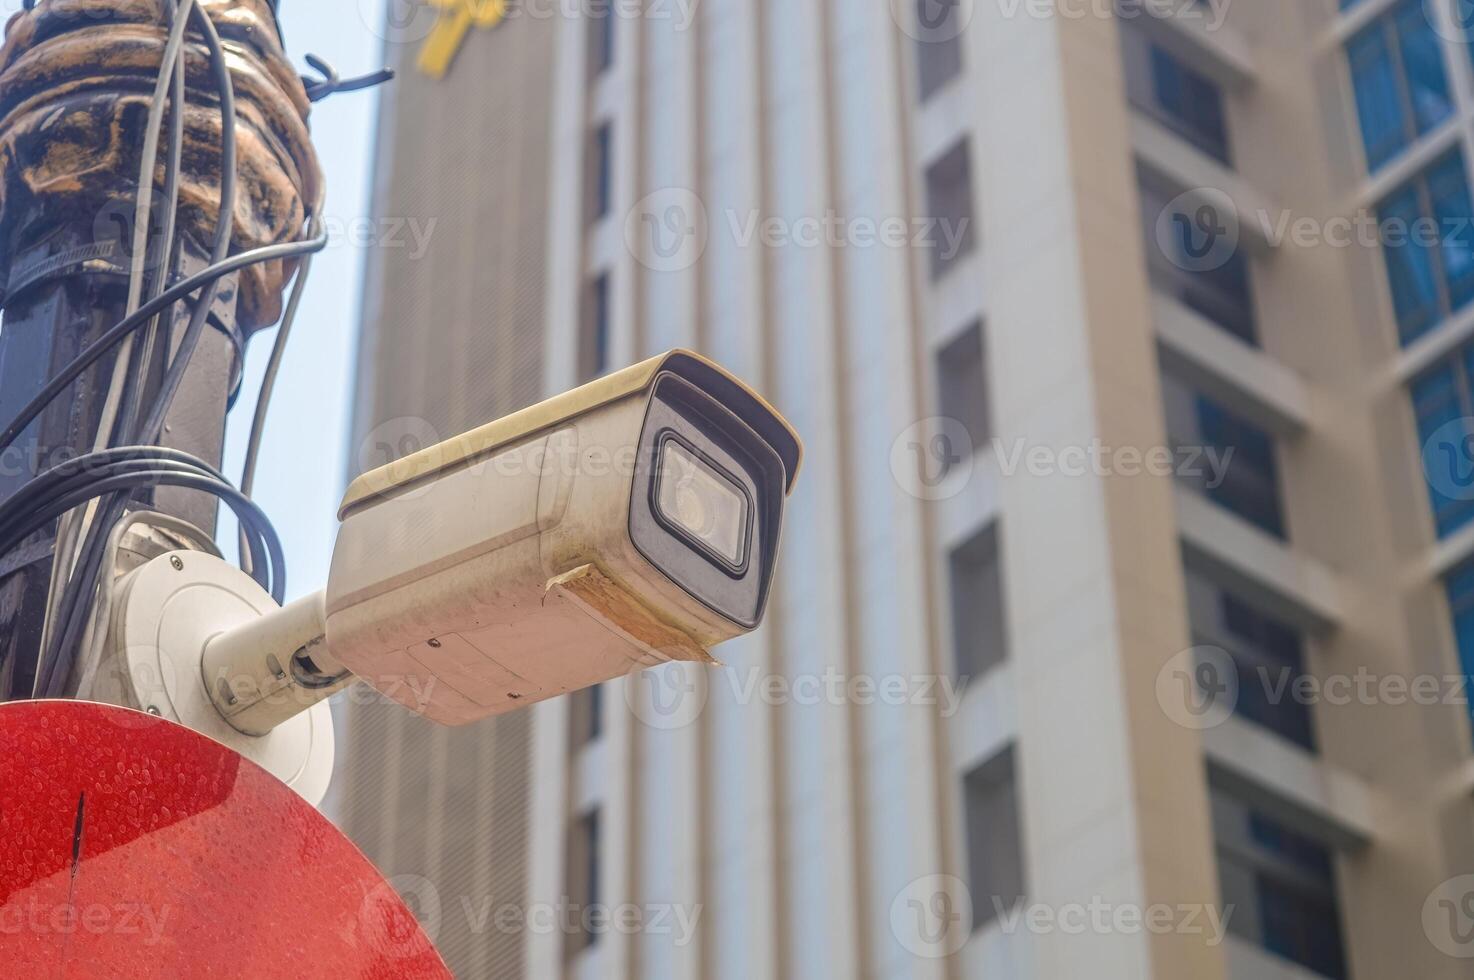 A CCTV surveillance camera attached to an electricity pole is monitoring the city photo